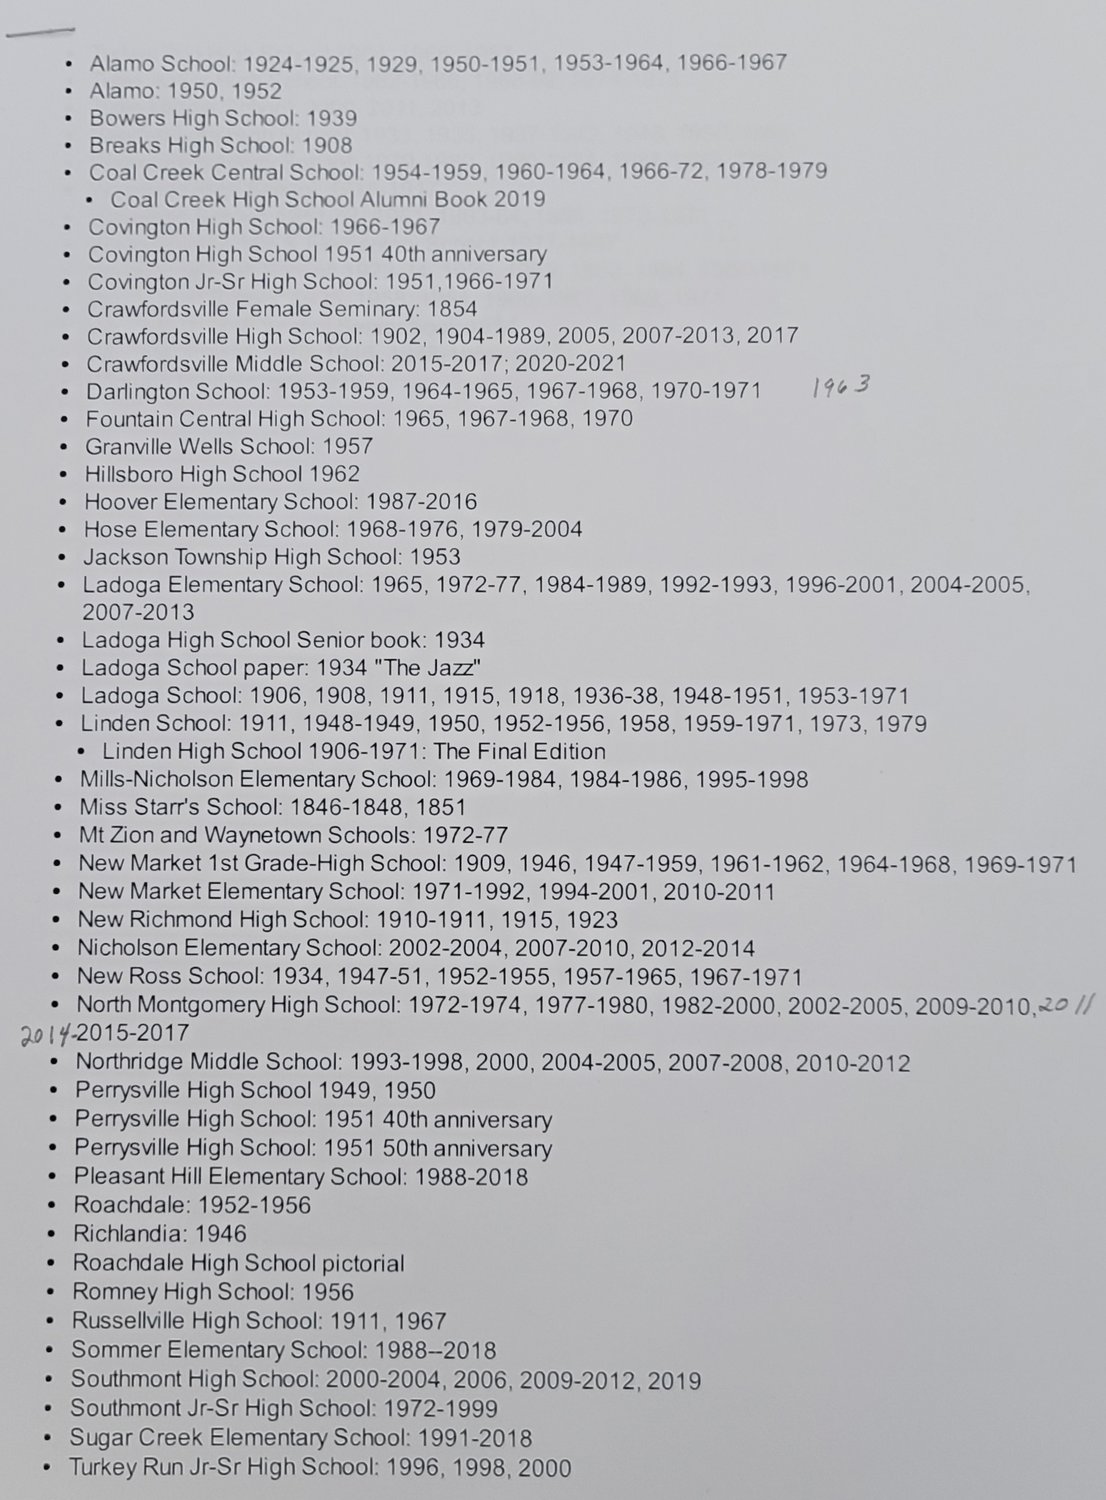 This is a list of yearbooks currently in the Crawfordsville District Public Library.